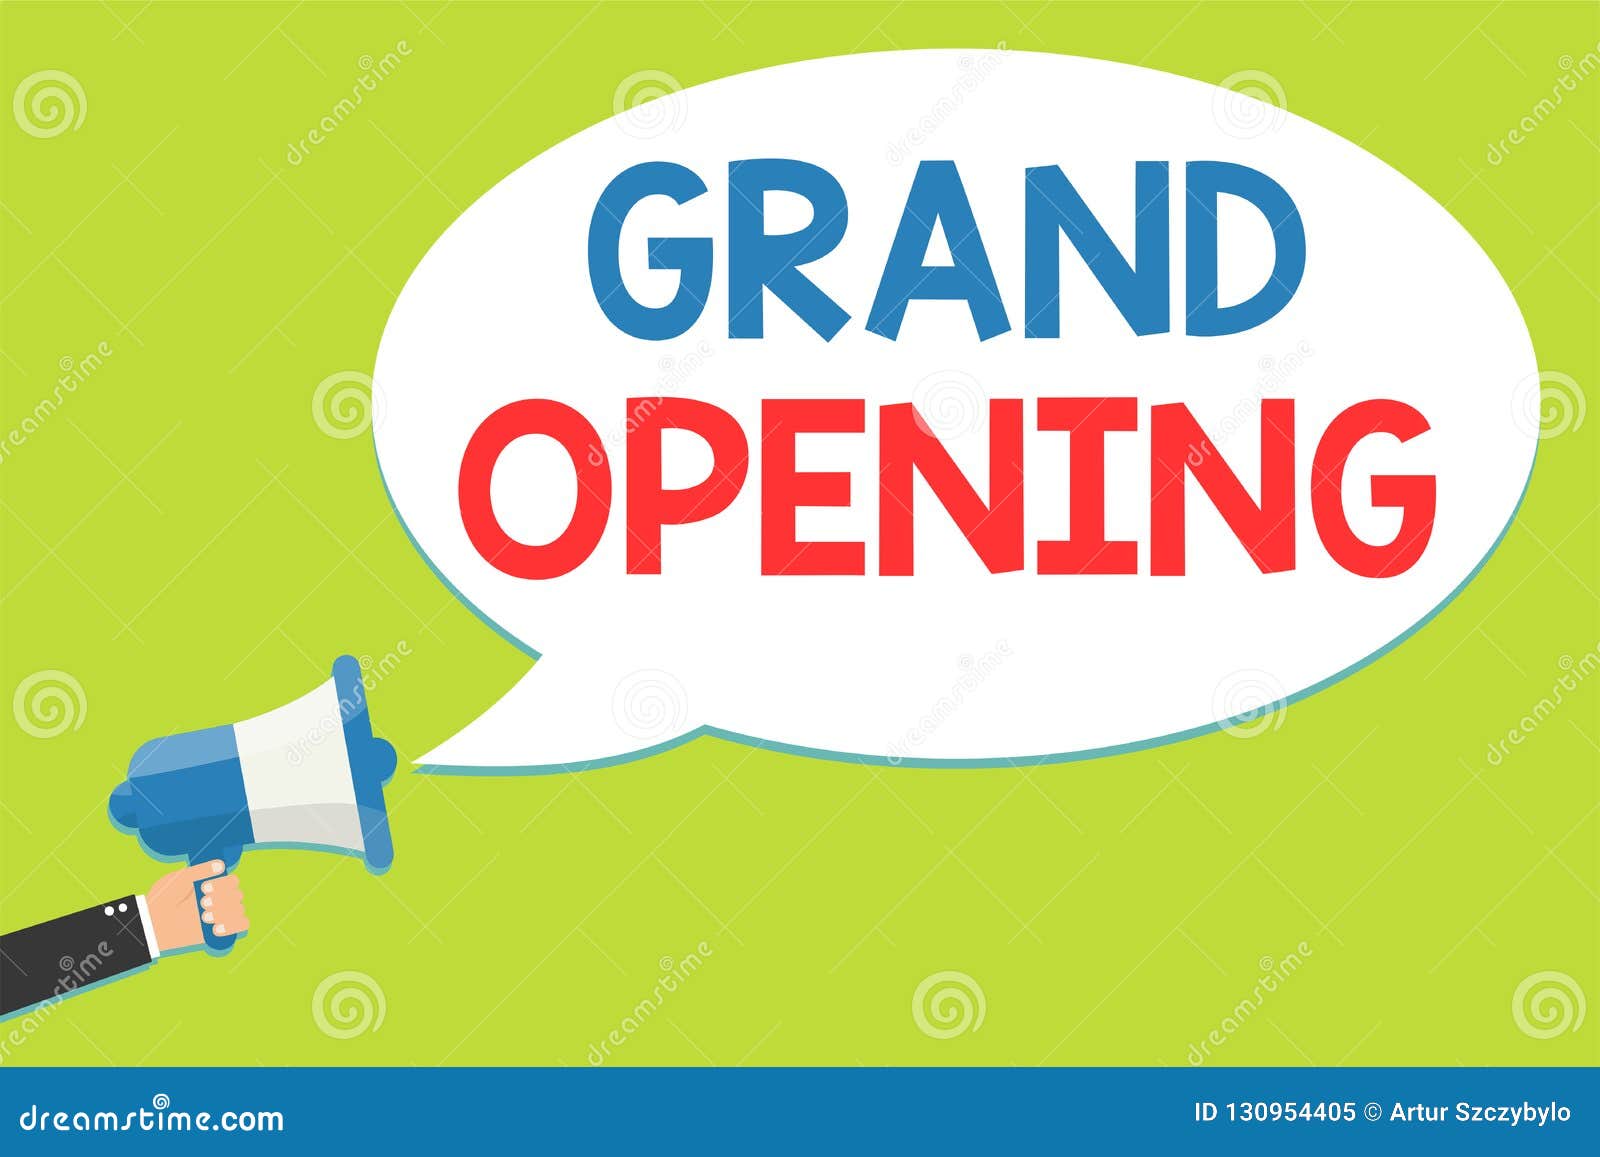 Word Writing Text Grand Opening. Business Concept for Ribbon